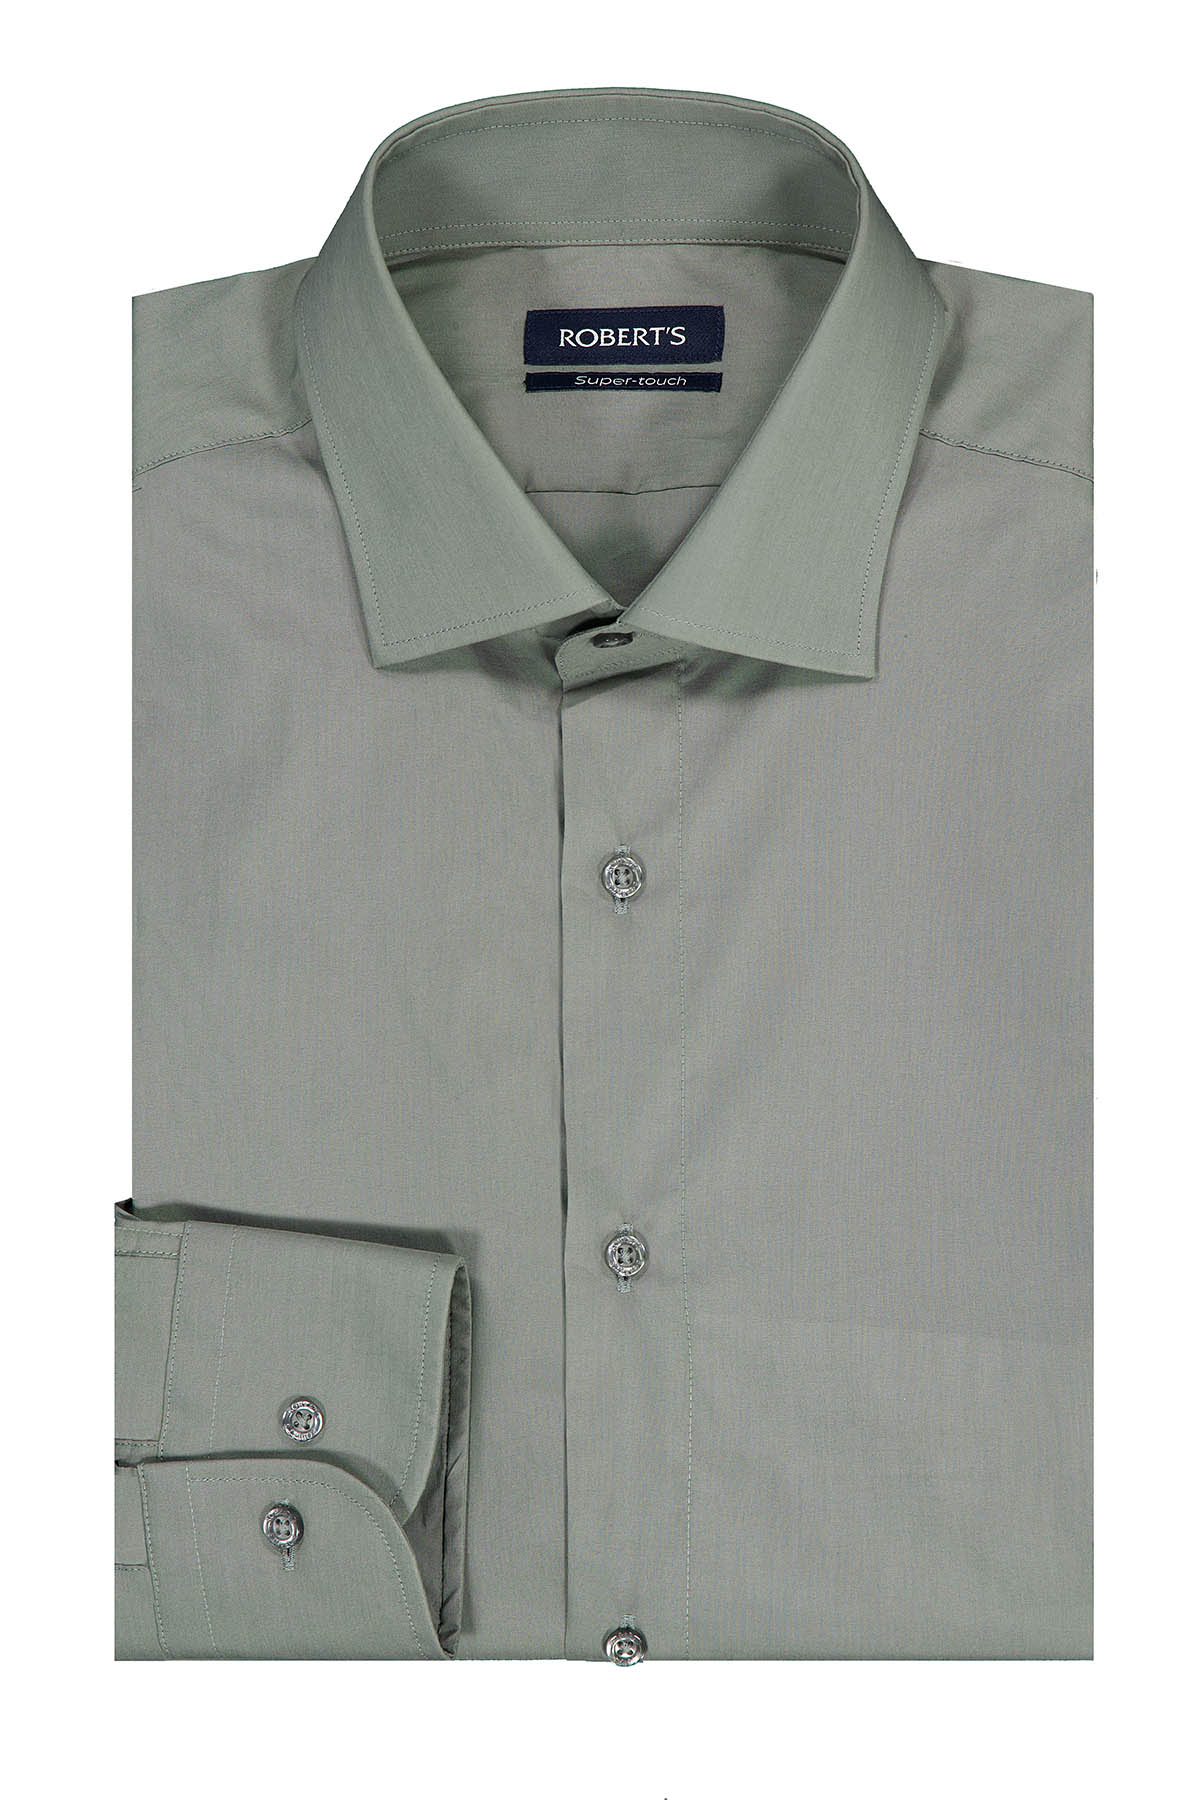 Camisa Sport Roberts Super Touch Gris Slim Fit